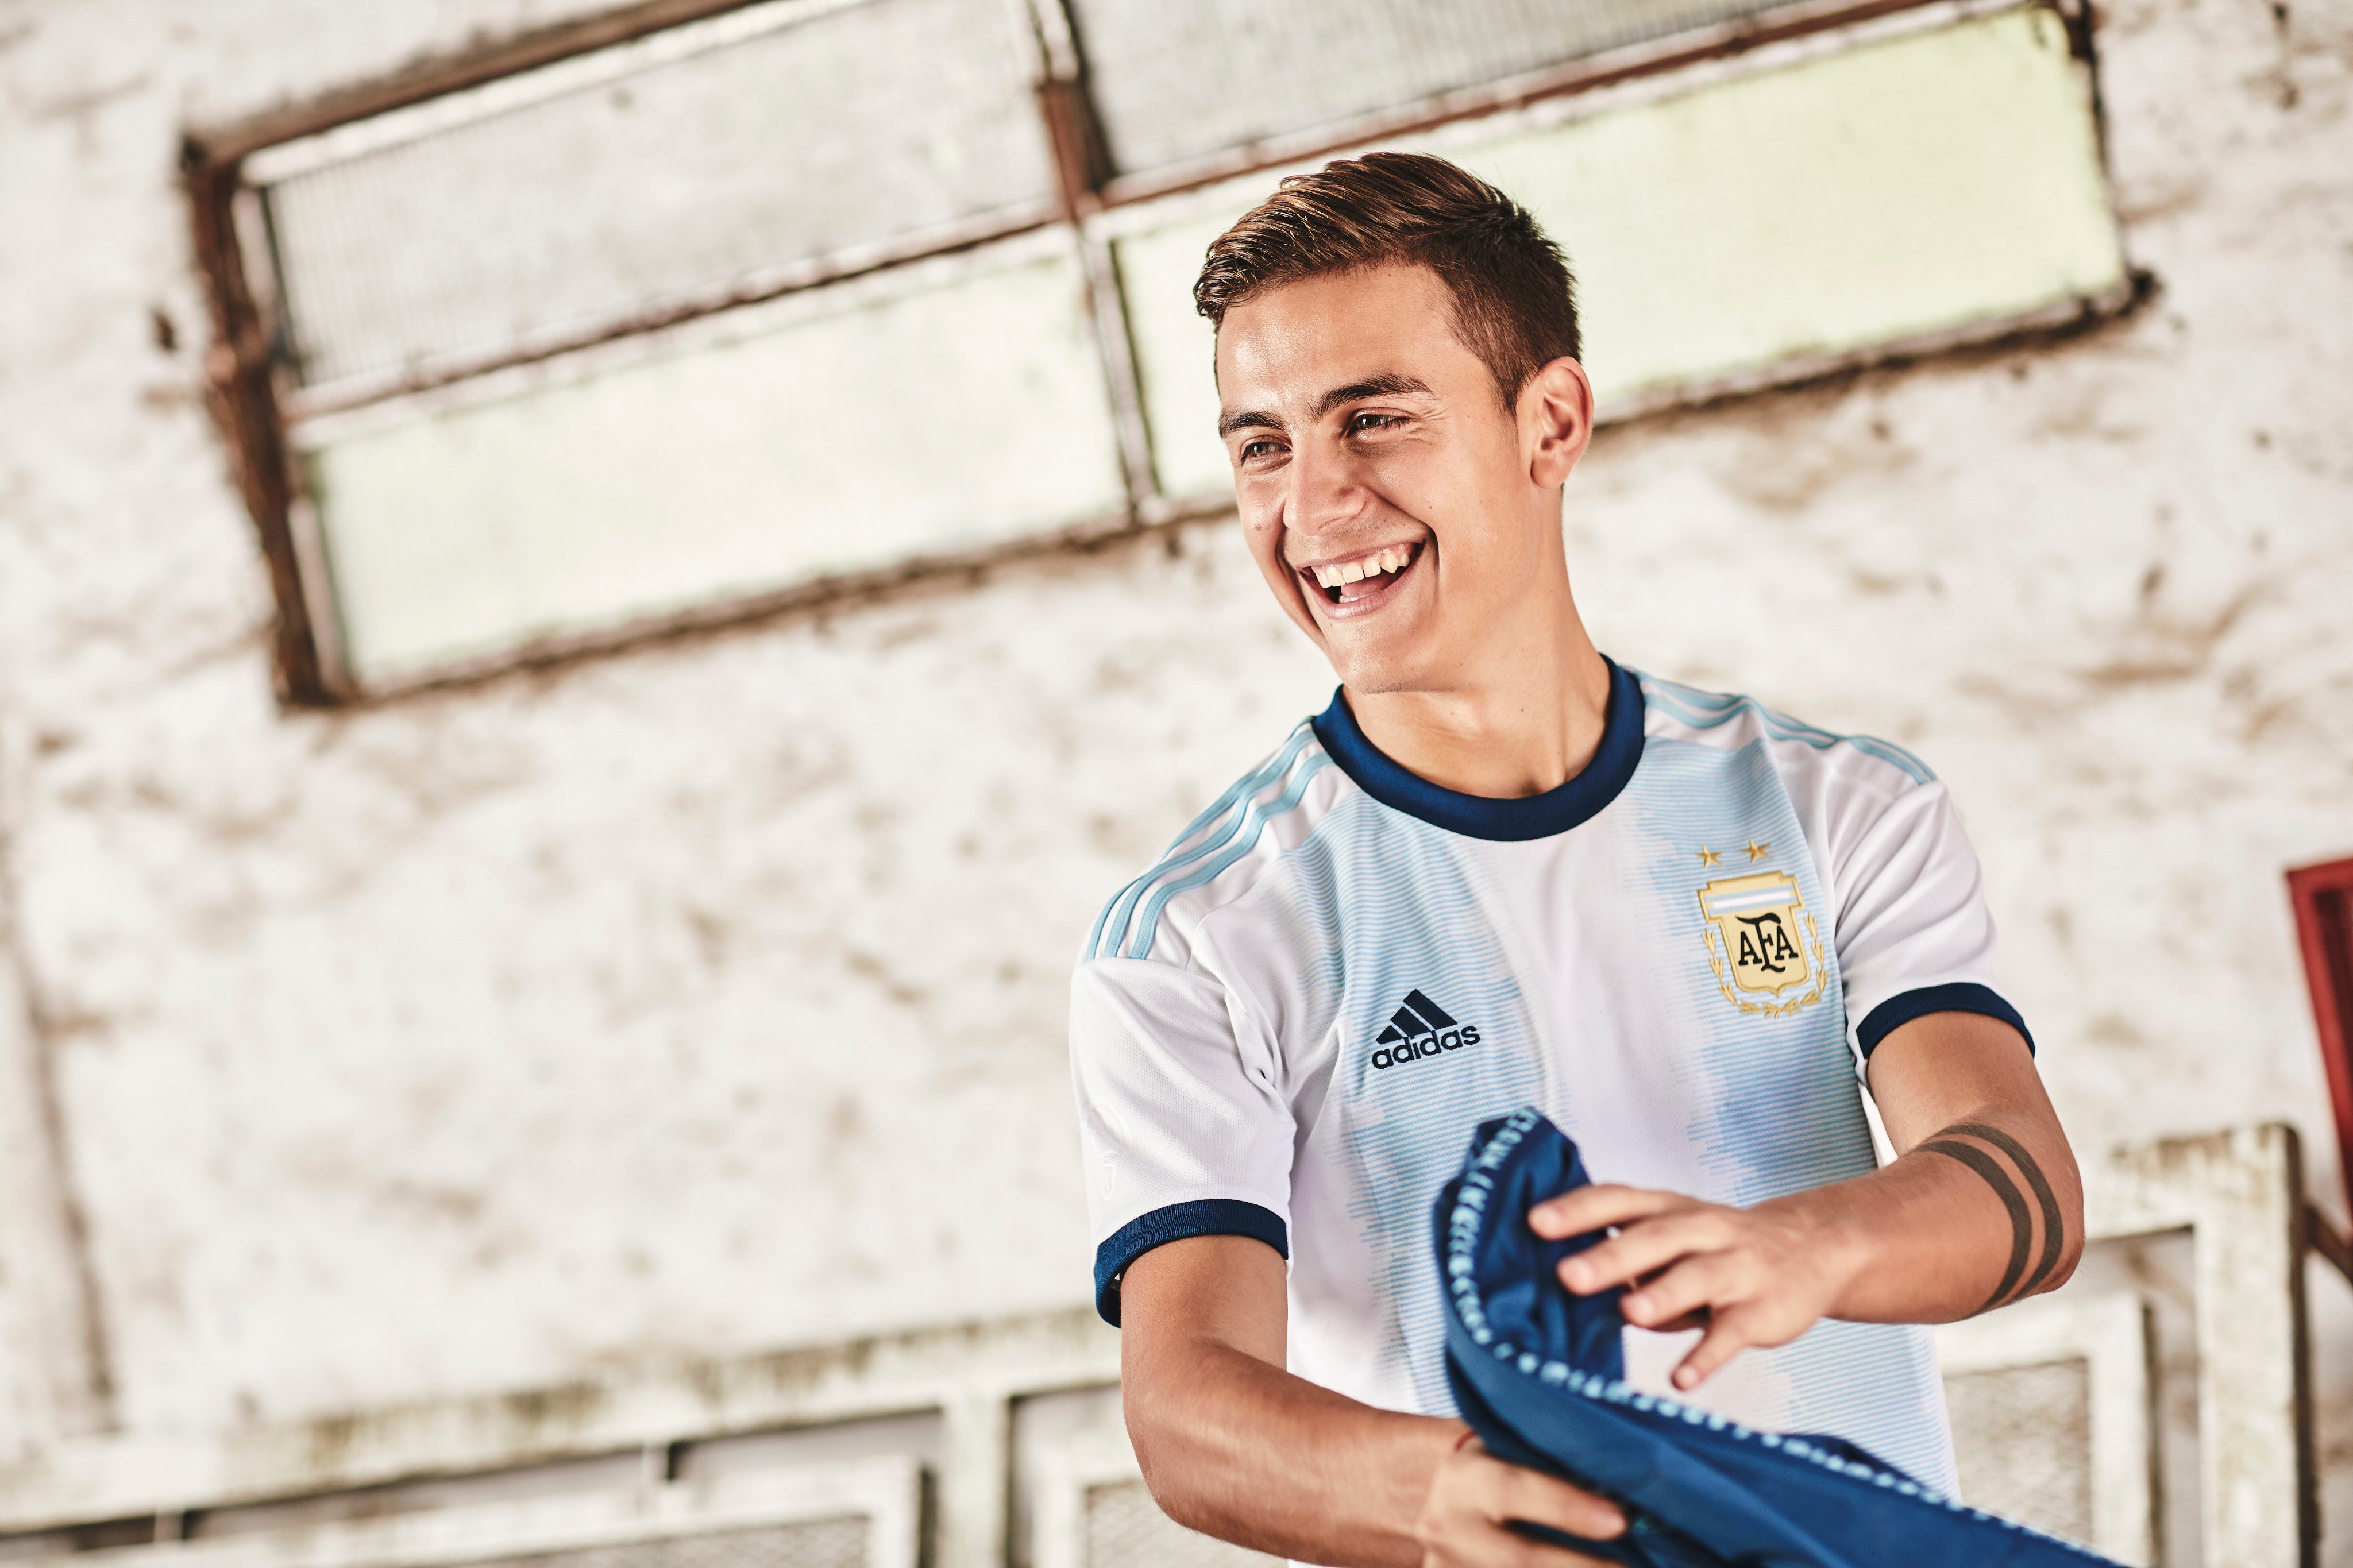 adidas Football on Twitter: "Pride of a nation. Introducing the new 2019 Home kits for: 🇦🇷: @afa 🇨🇴: @FCFSeleccionCol @miseleccionmx Exclusively available now through https://t.co/tJwR68heBN or one of our stores. #DareToCreate